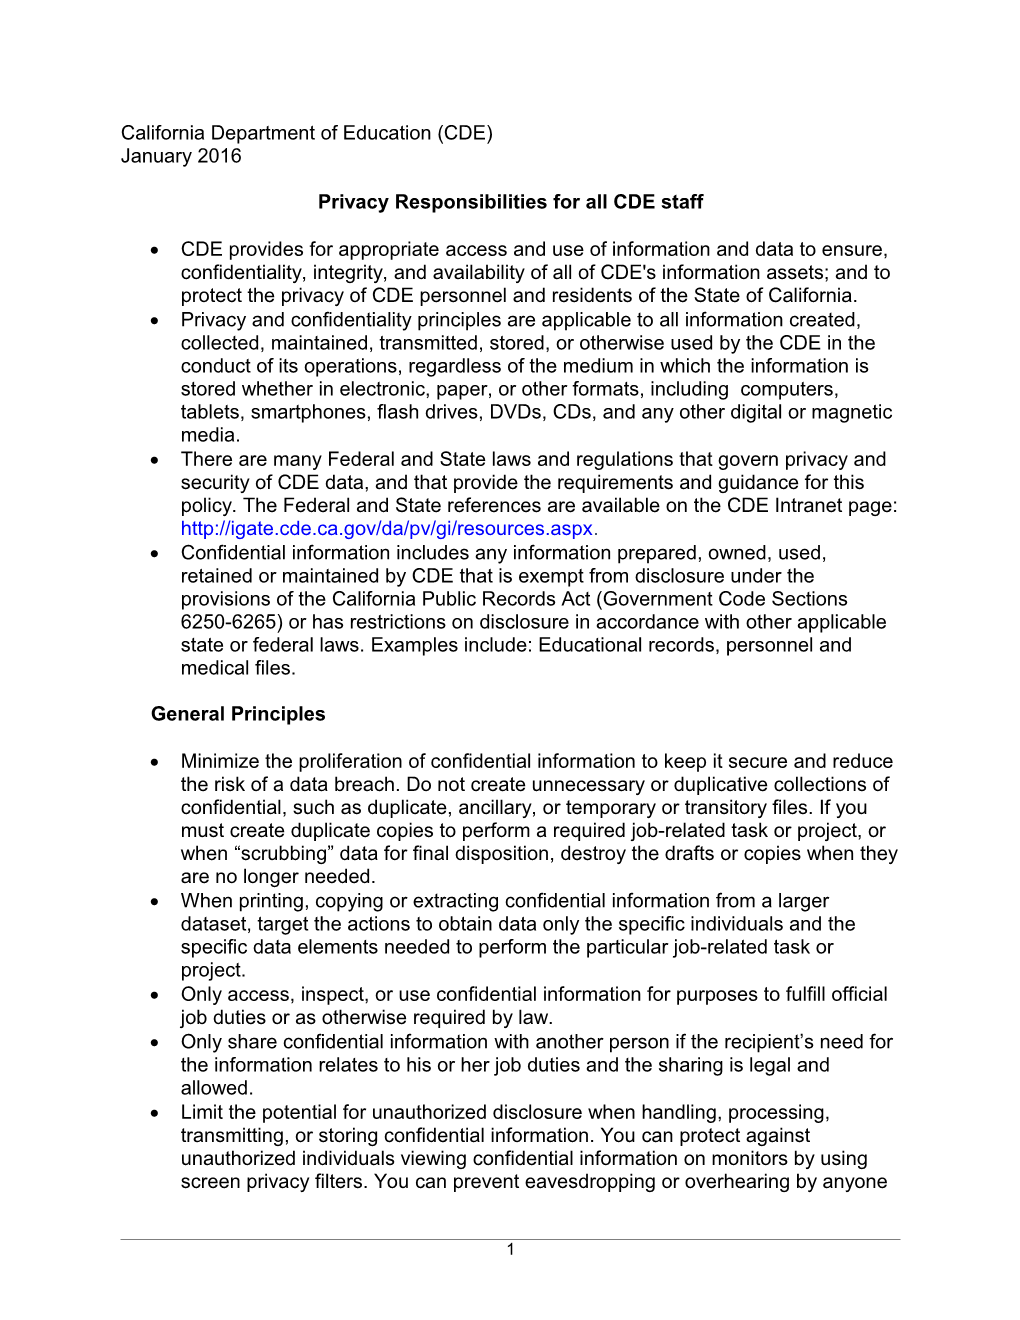 Privacy and Confidentiality DEAM 10600 (CA Dept of Education)